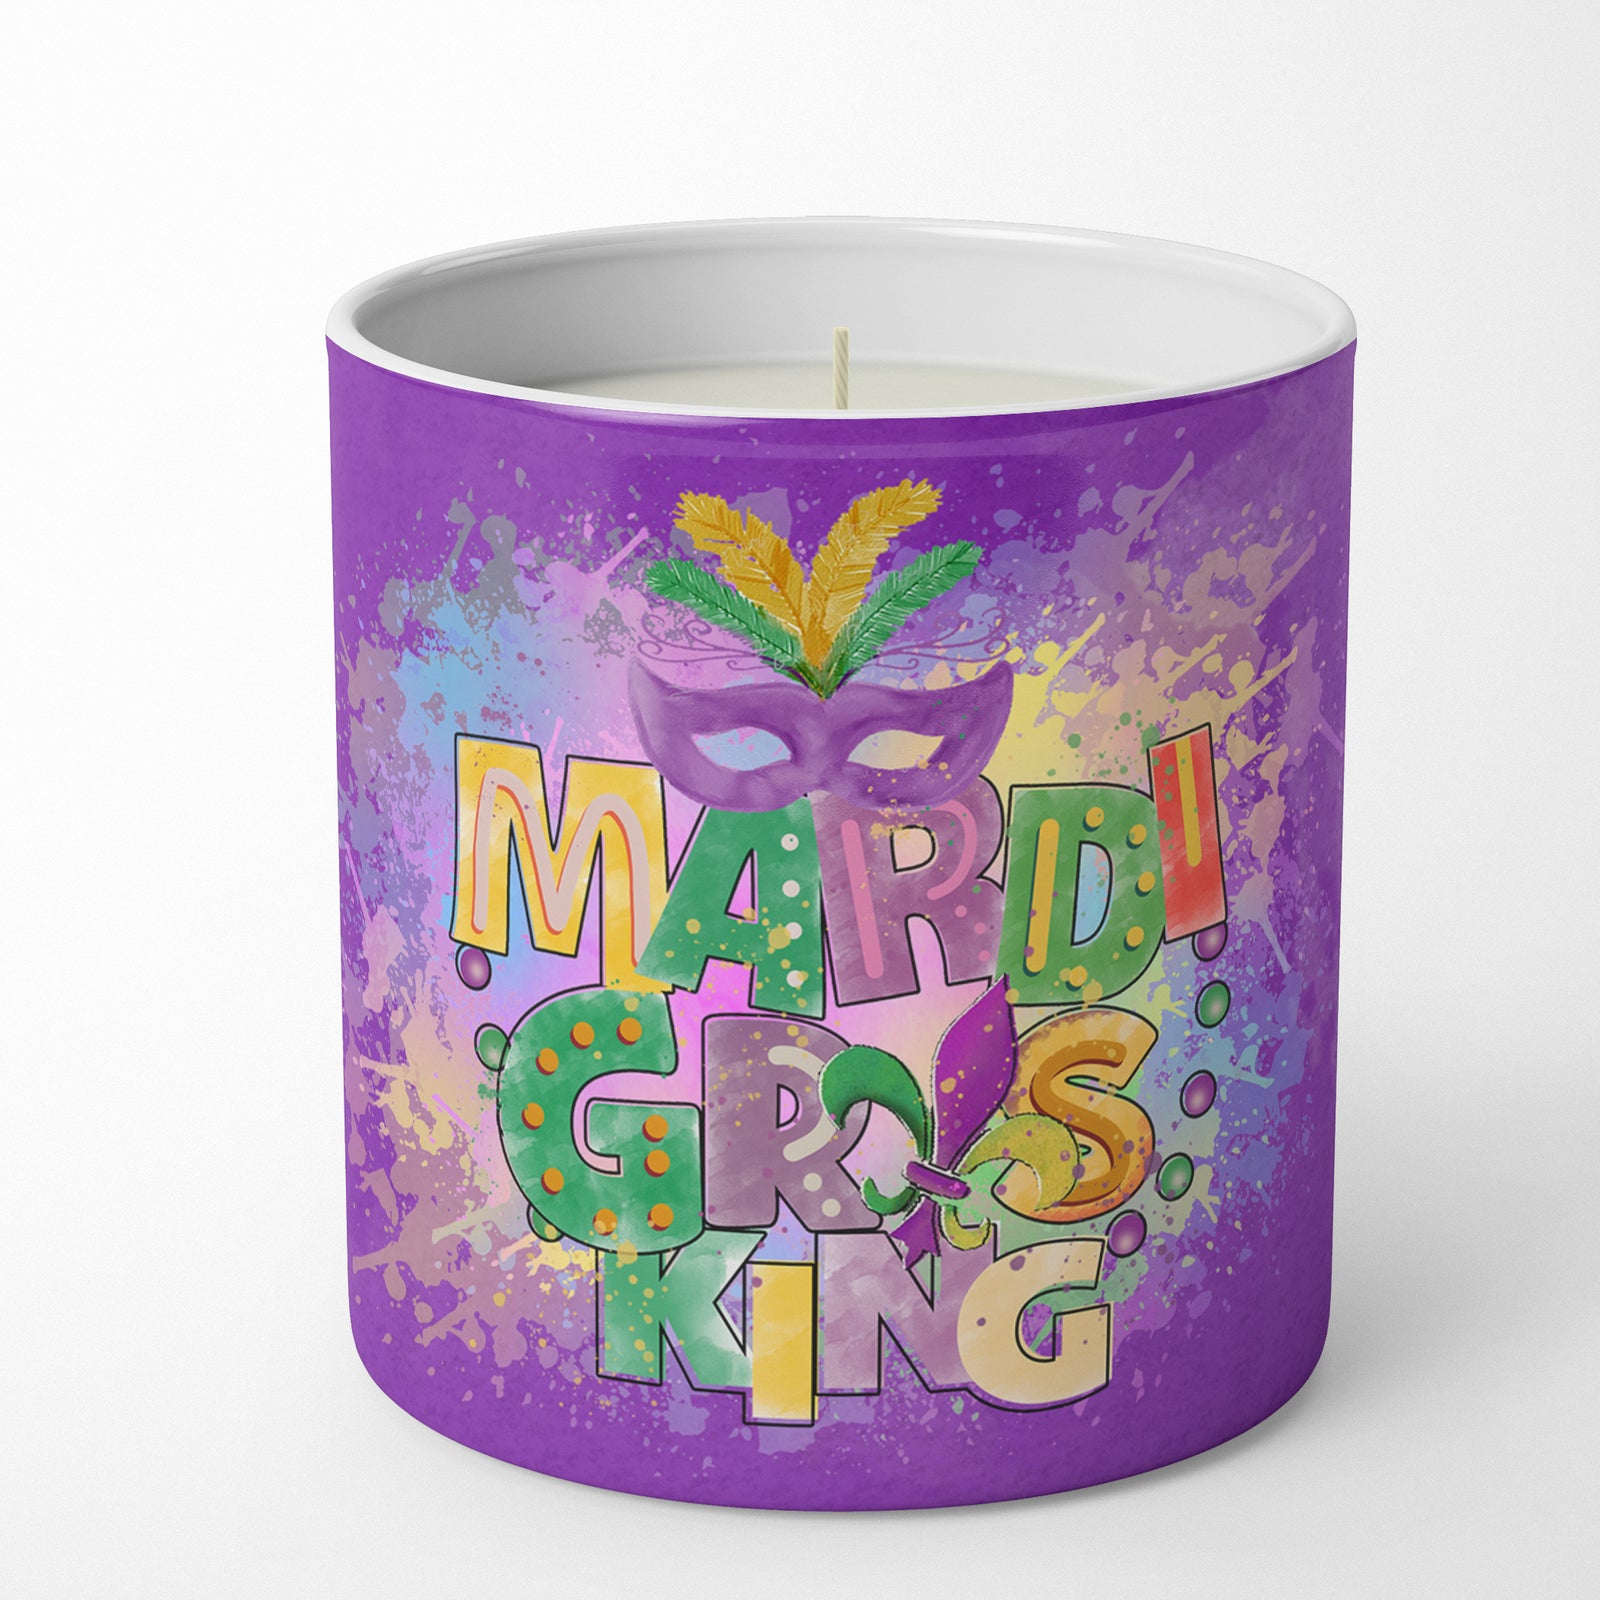 Buy this Mardi Gras King 10 oz Decorative Soy Candle